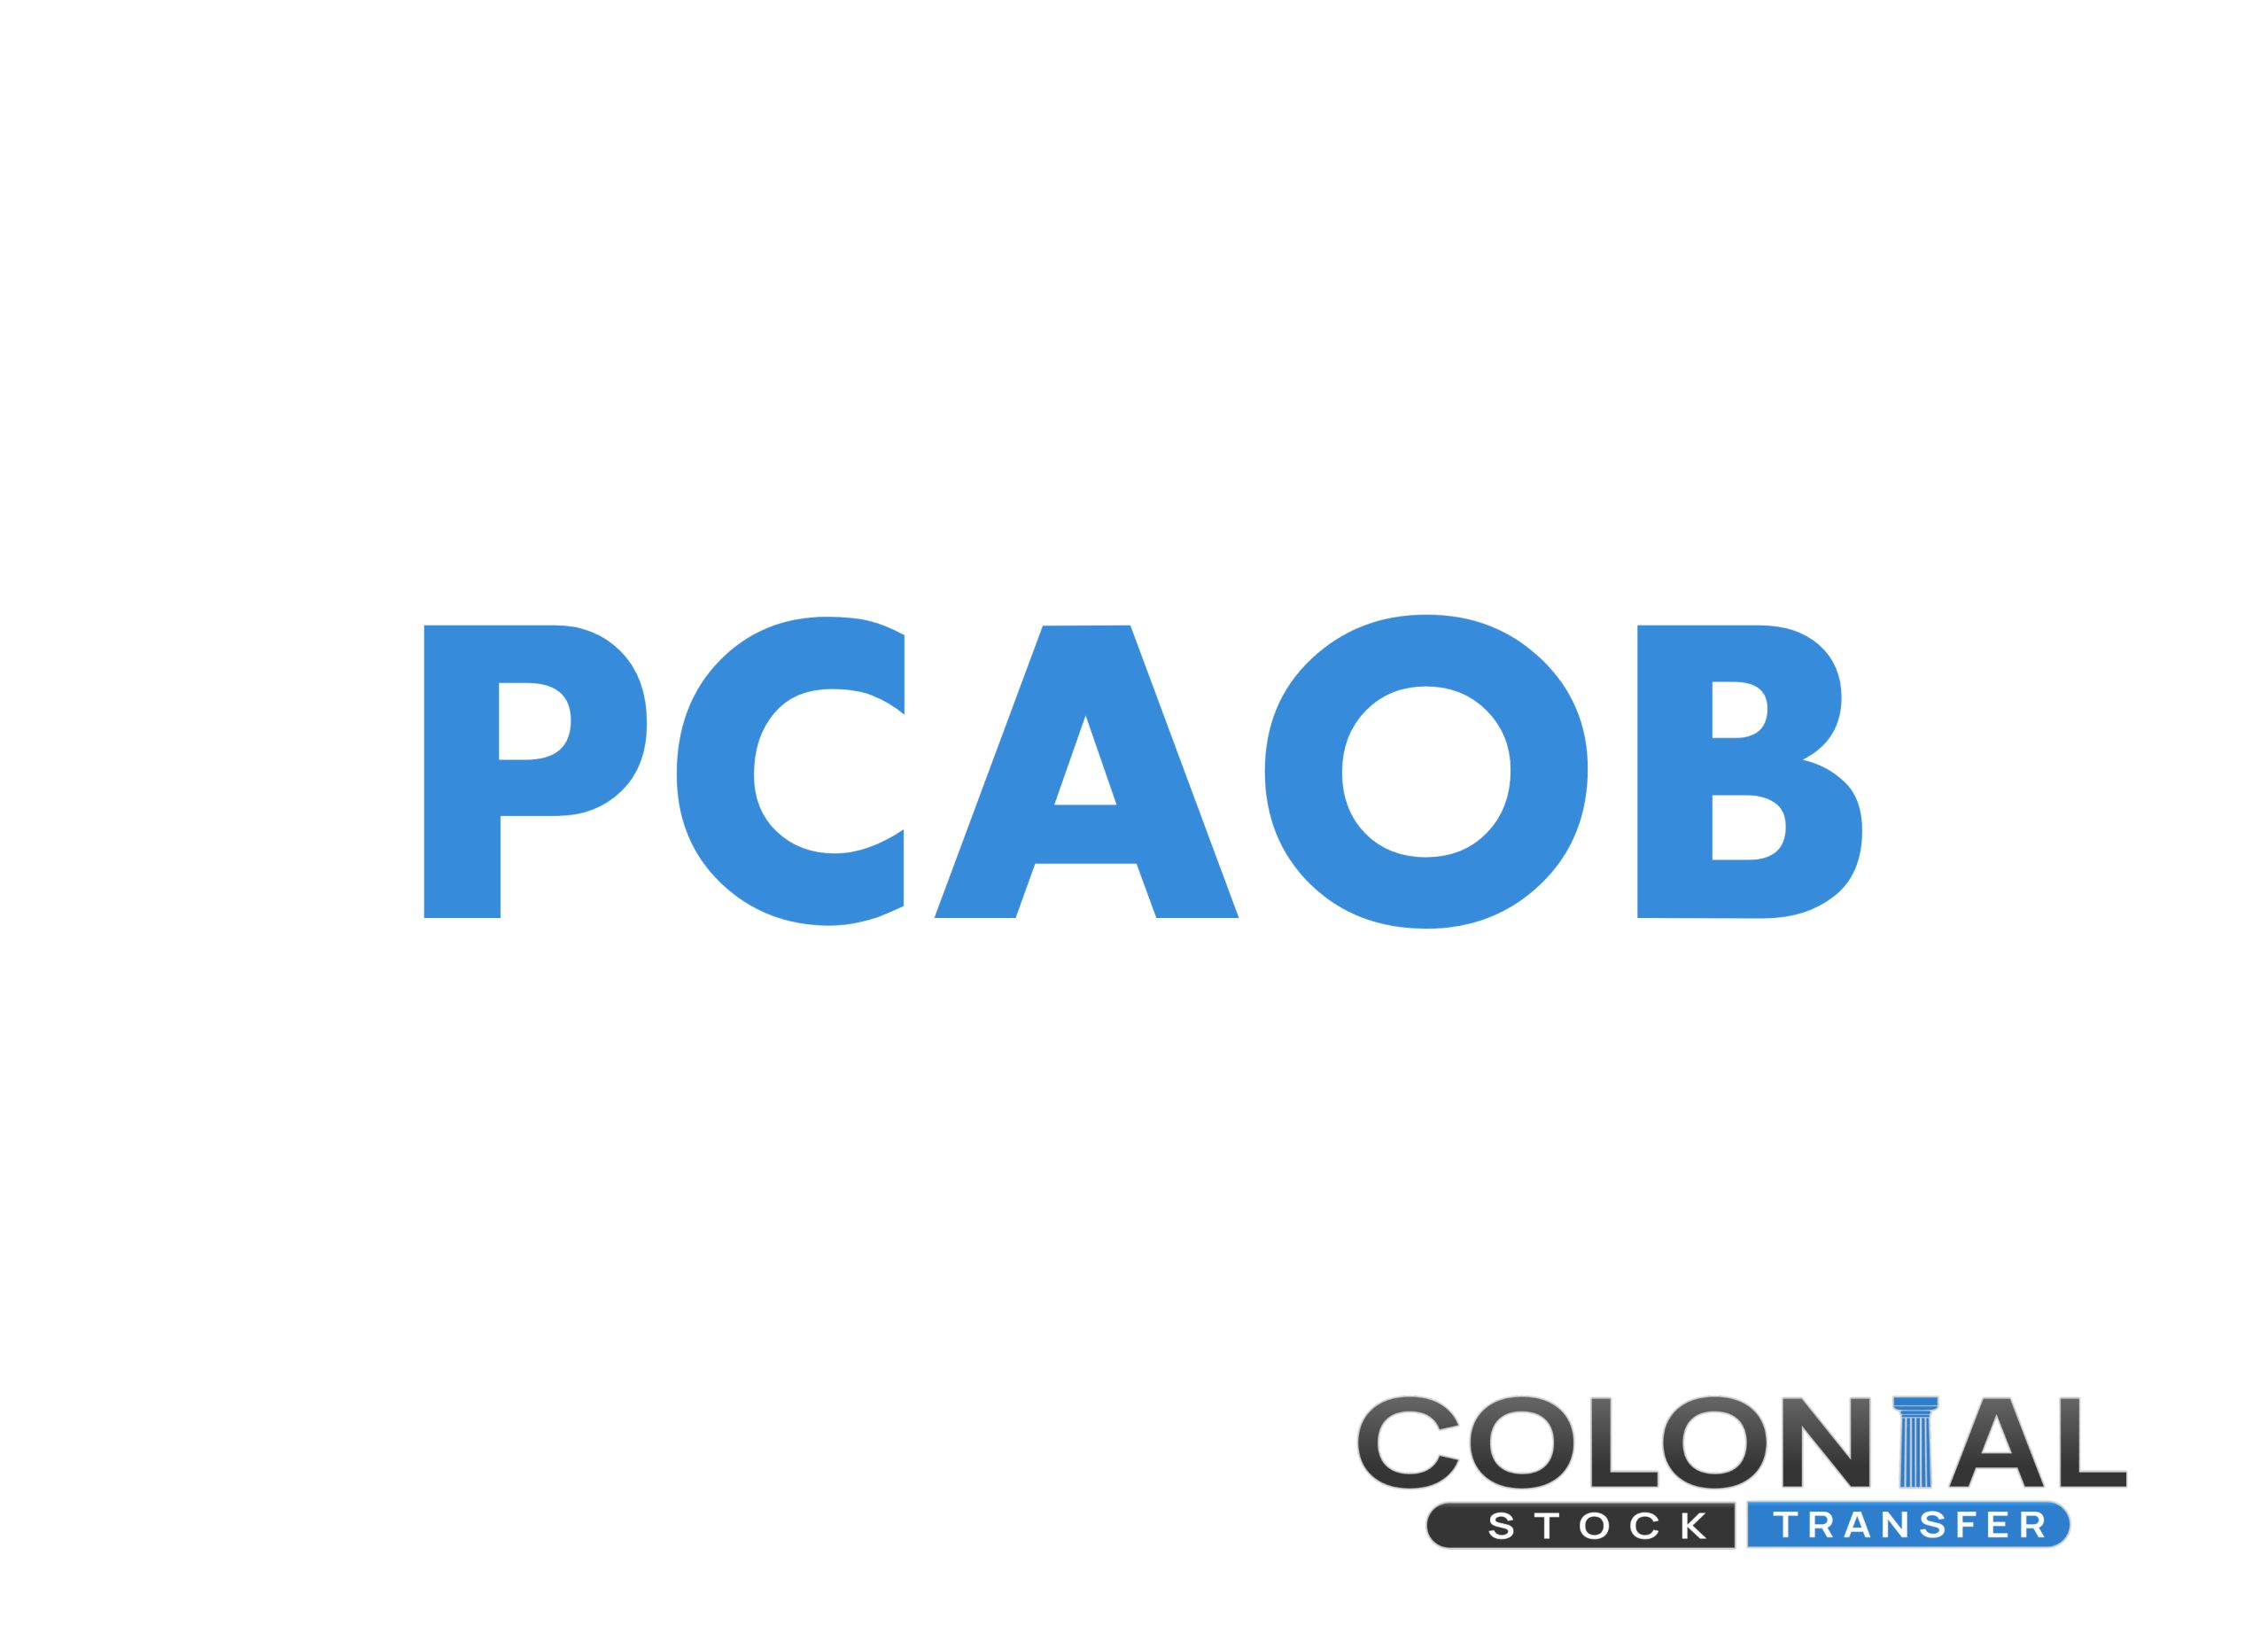 PCAOB Reached Deal with China and Hong Kong on The Foreign Companies Accountable Act